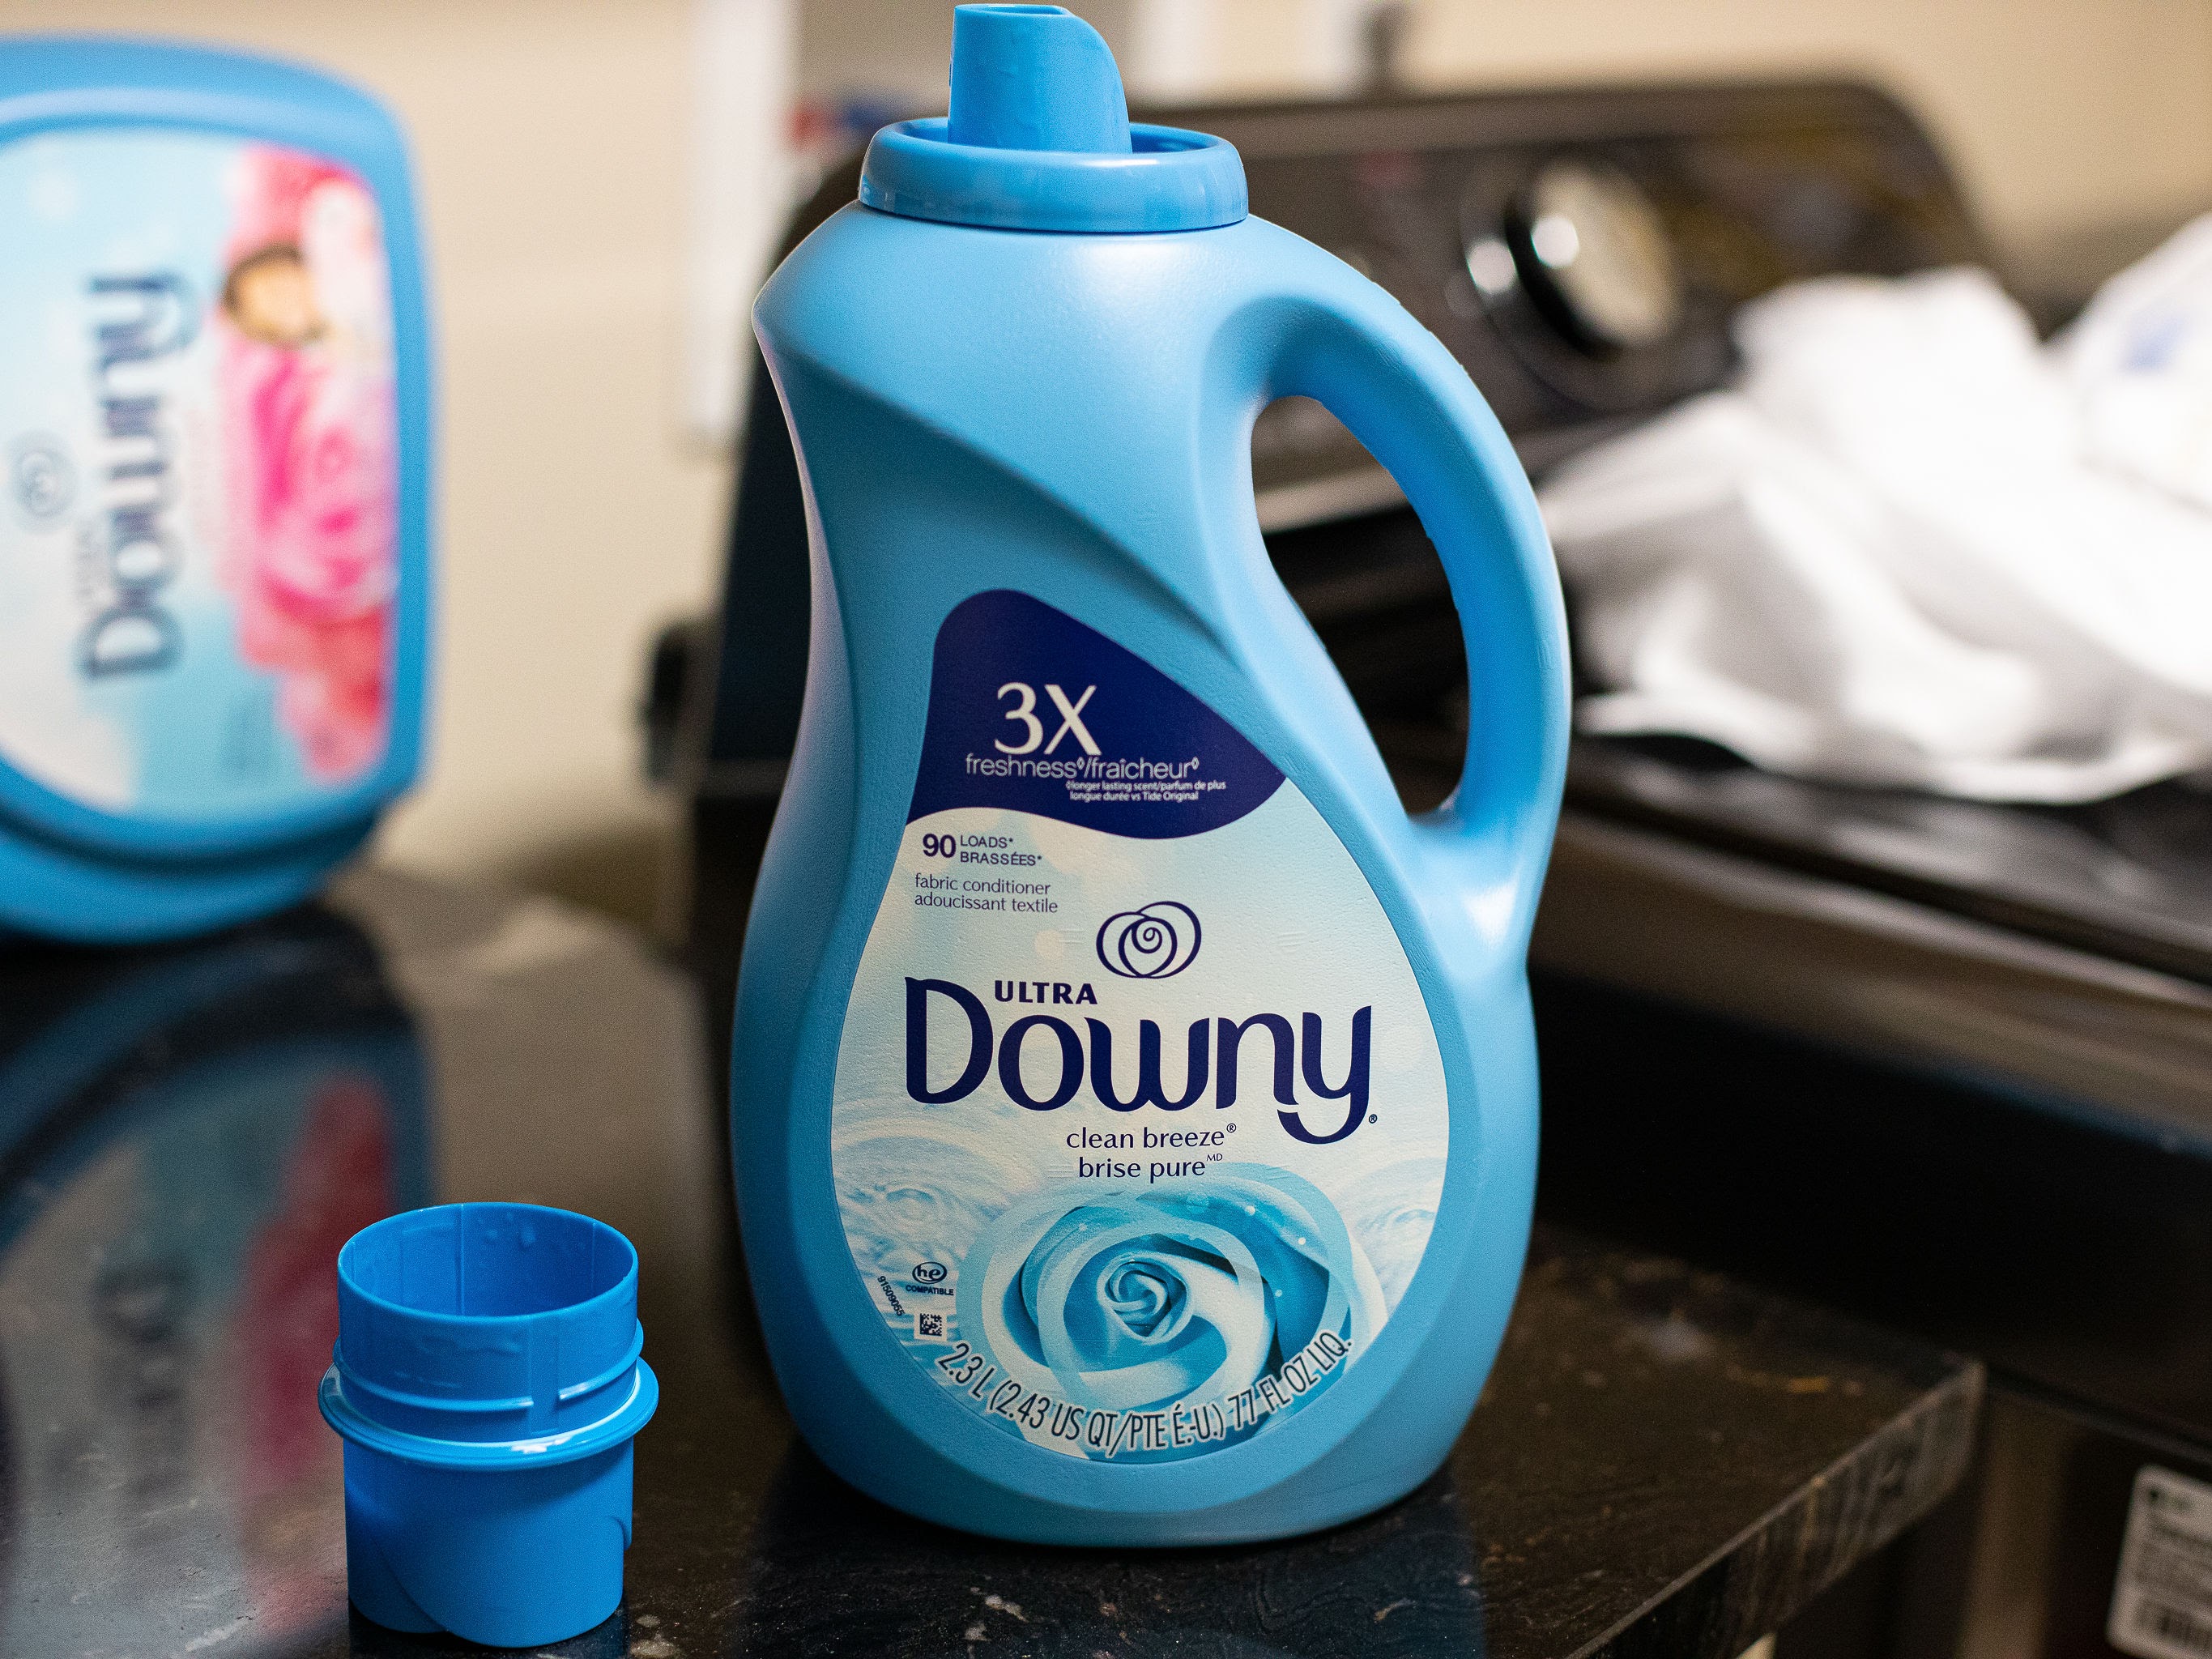 Get Downy Fabric Softener For Just $4.99 At Publix